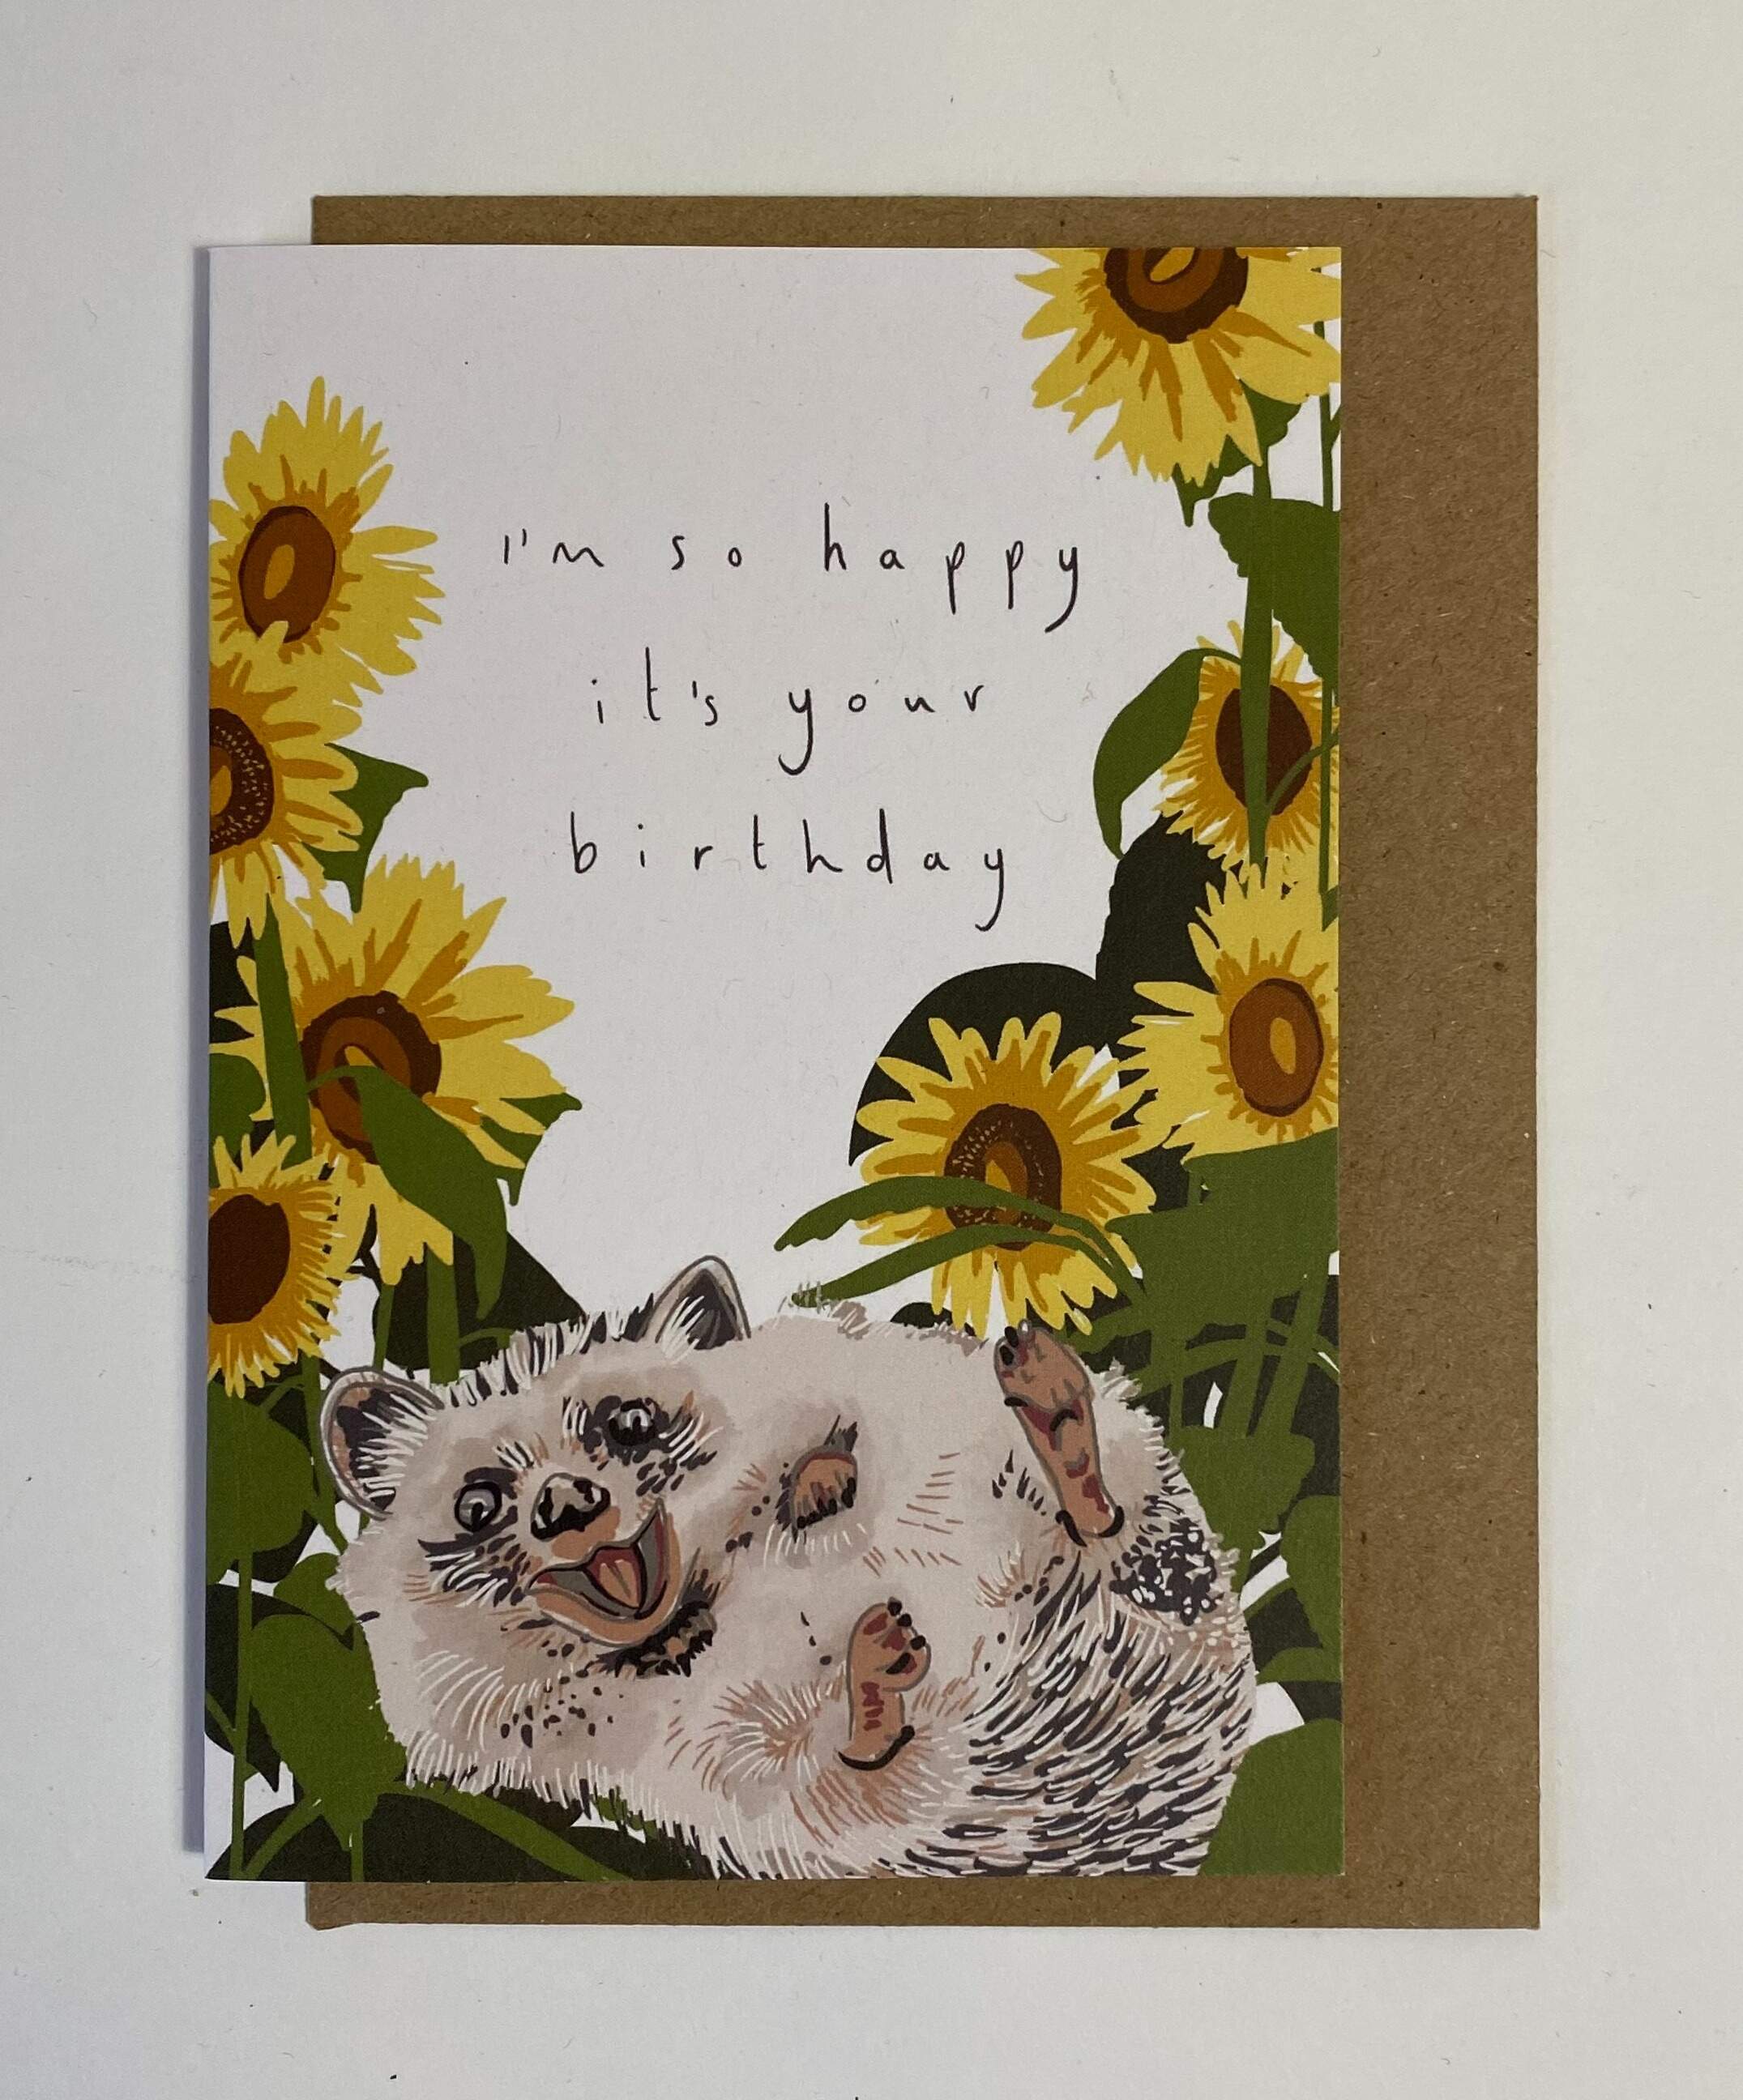 I'm so happy it's your birthday recycled greetings card LM043